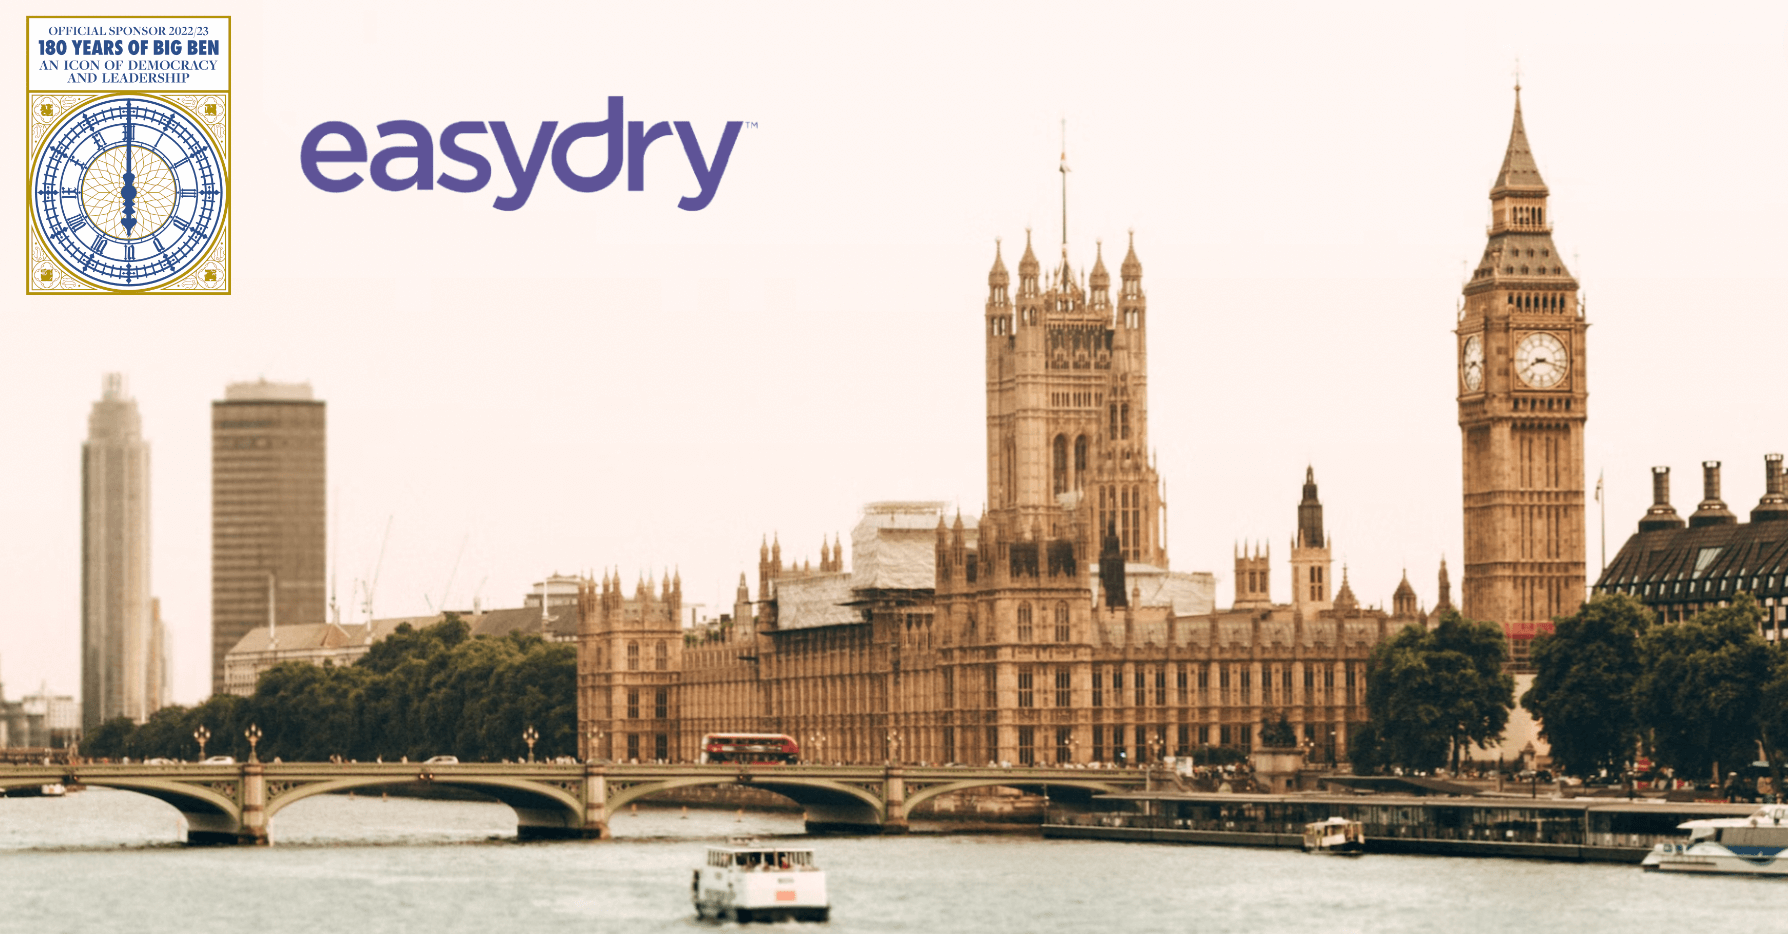 Easydry features in Big Ben Book: Big Ben: An Icon of Democracy and Leadership” project. Read more about Easydry in this iconic publication.